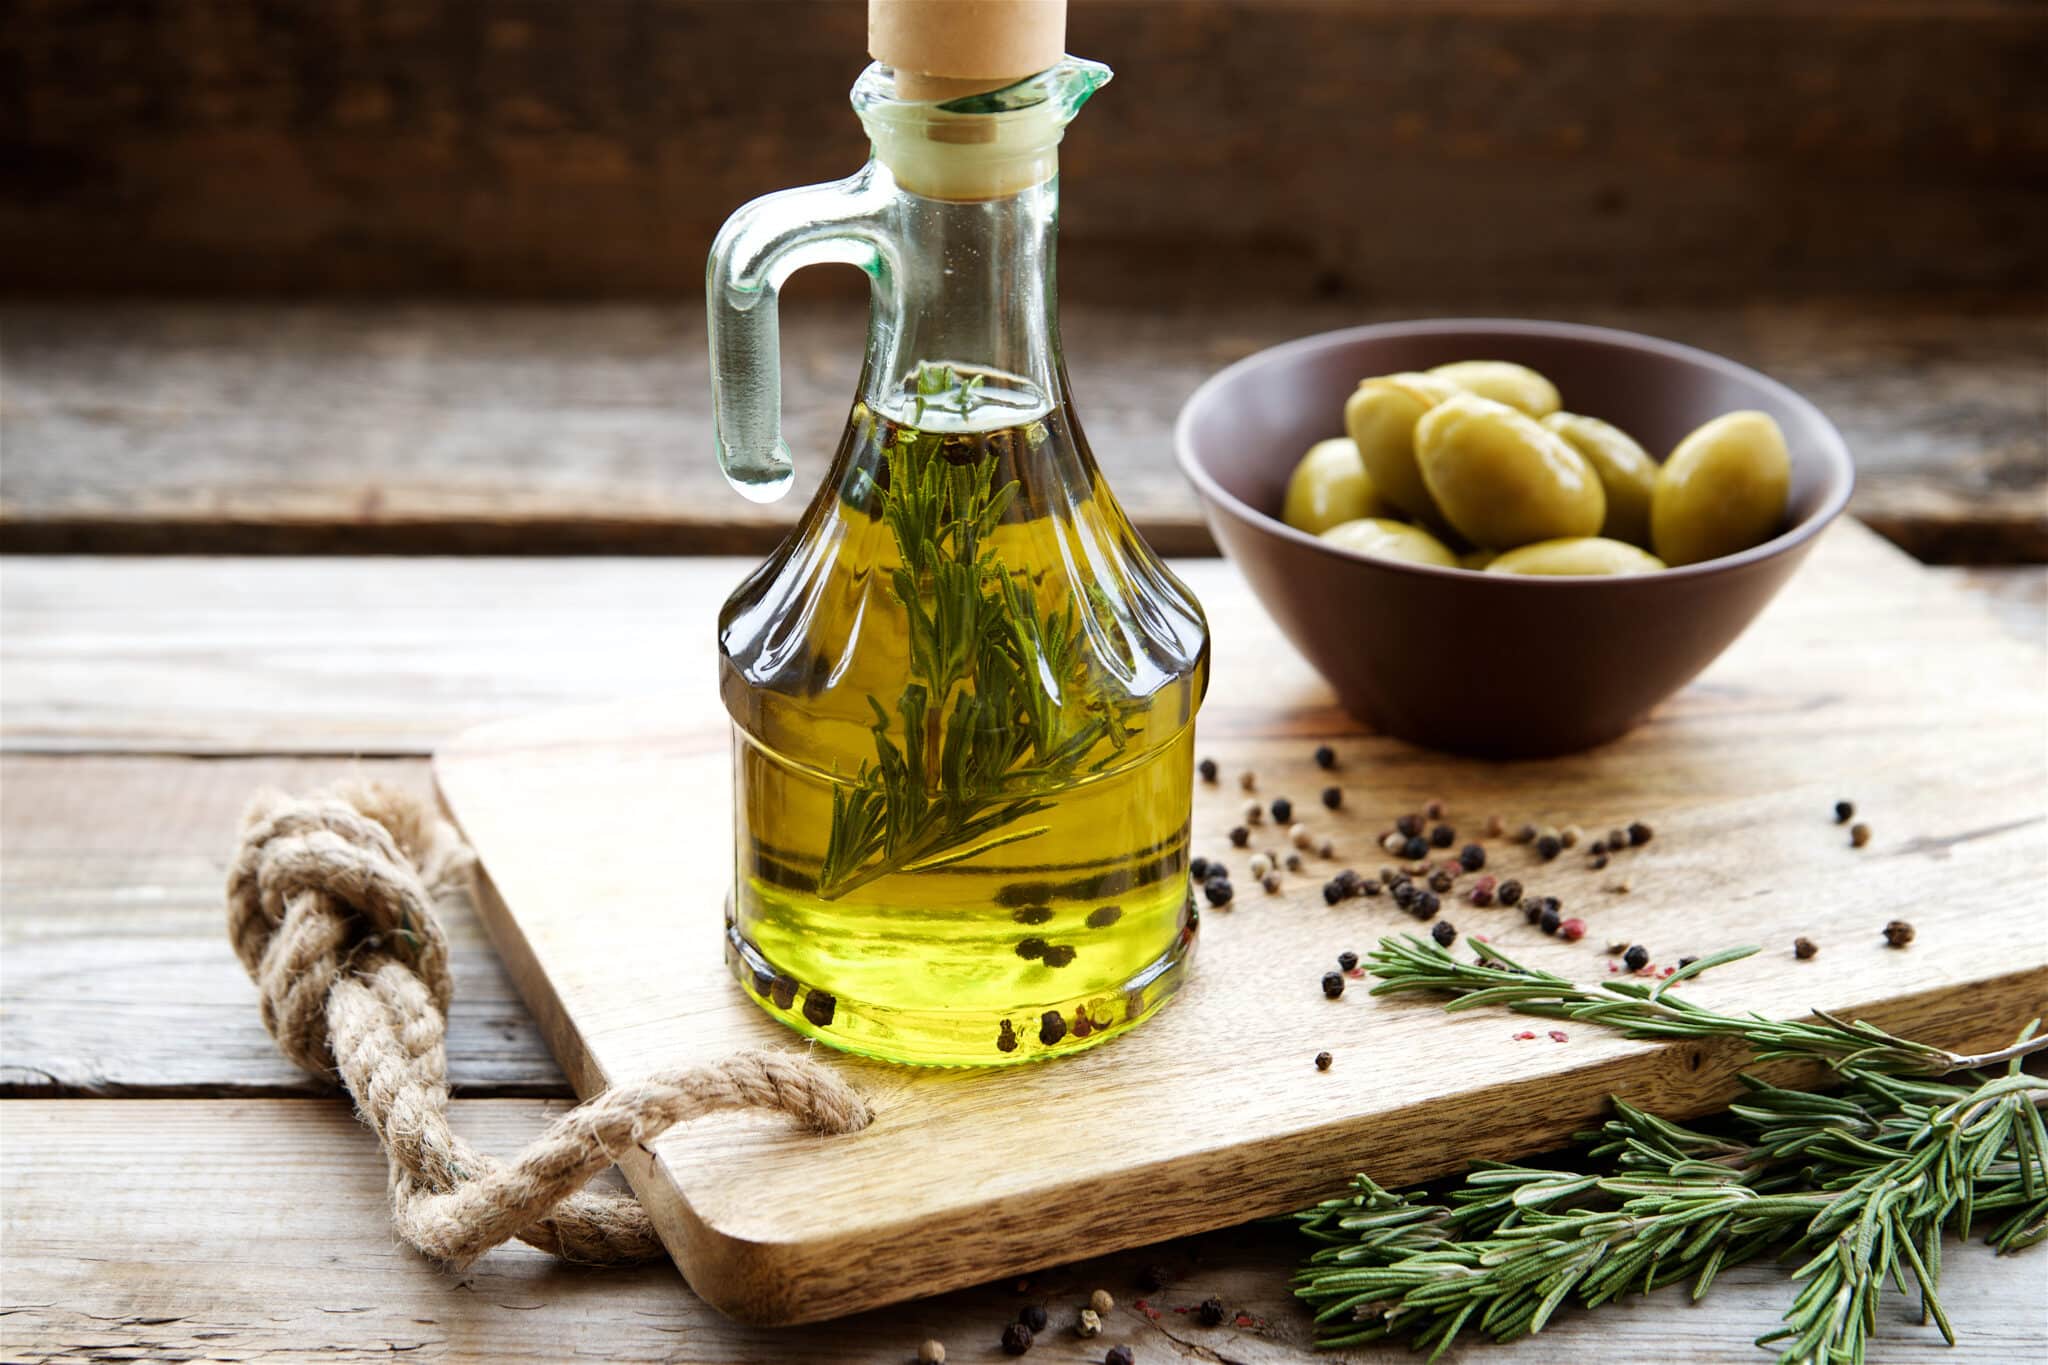 Homemade rosemary olive oil. How to infuse olive oil with rosemary.